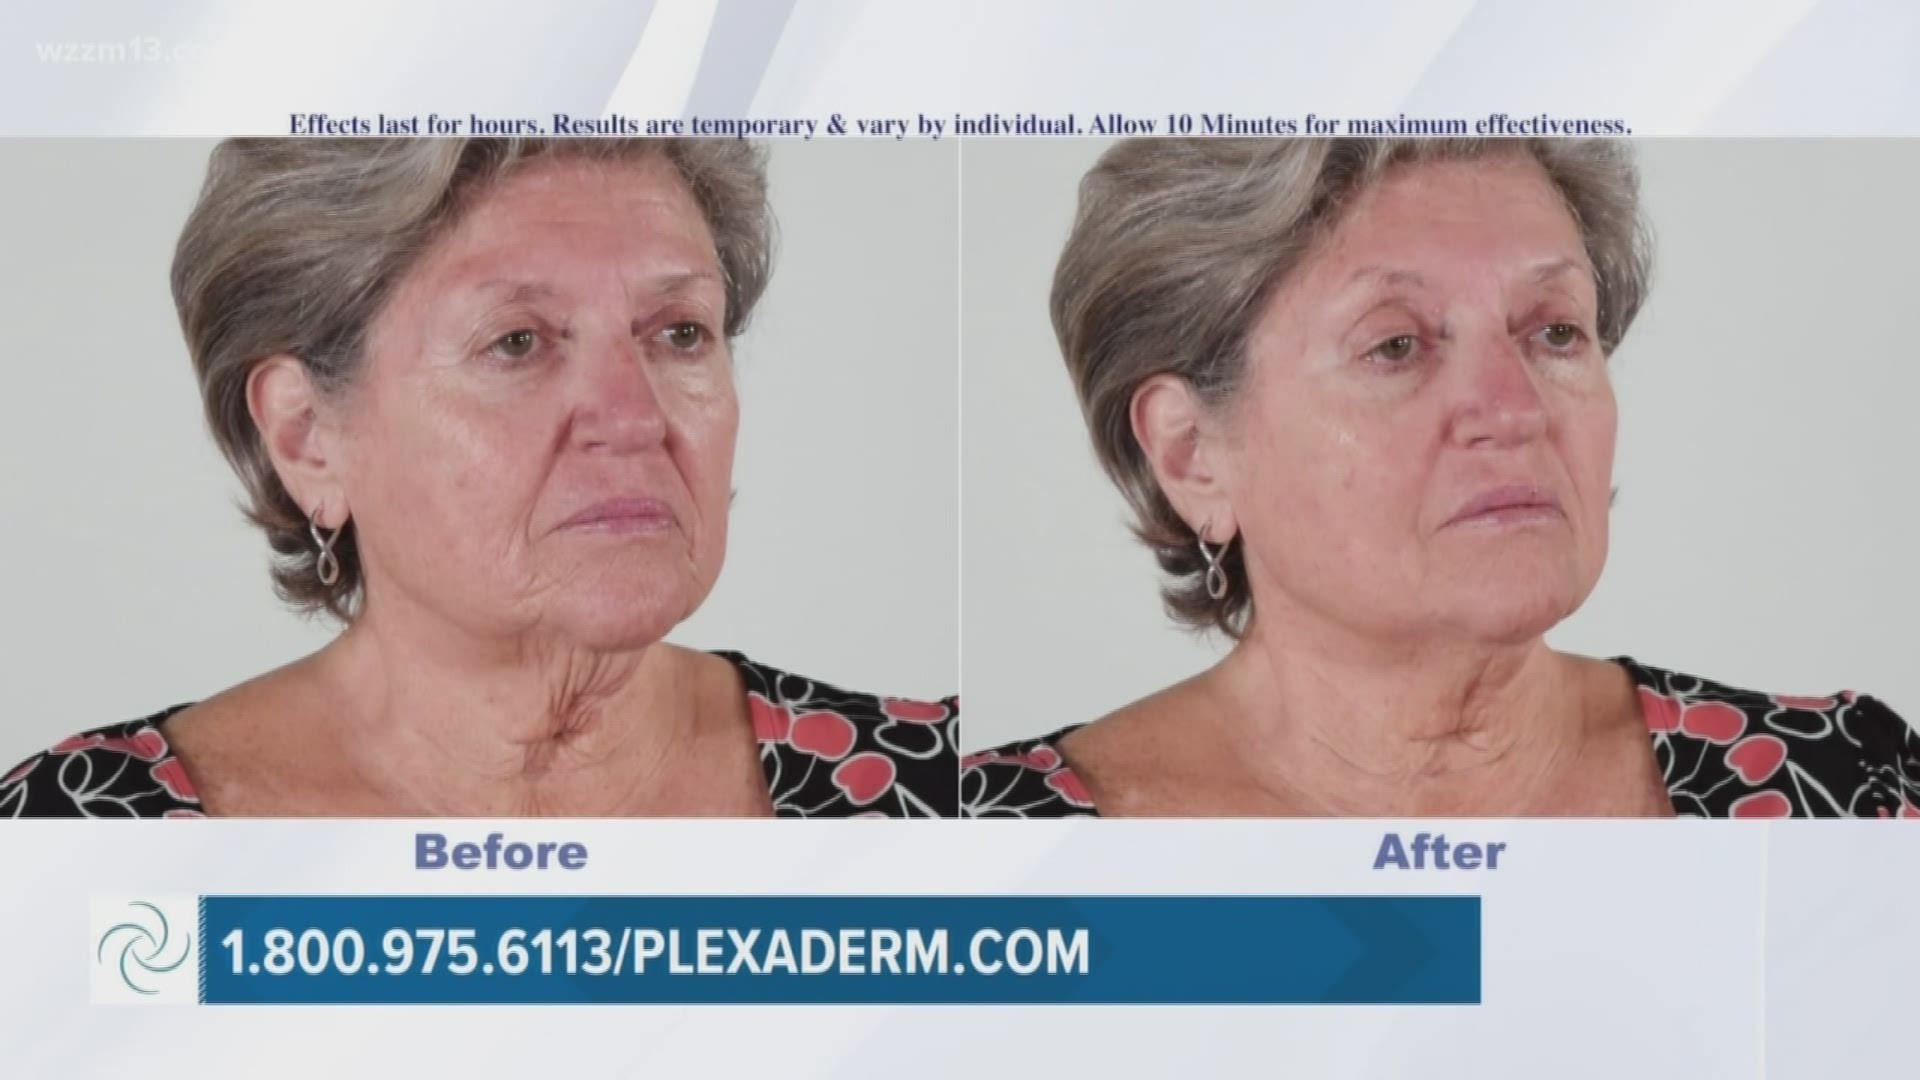 See how Plexaderm can help you look years younger.